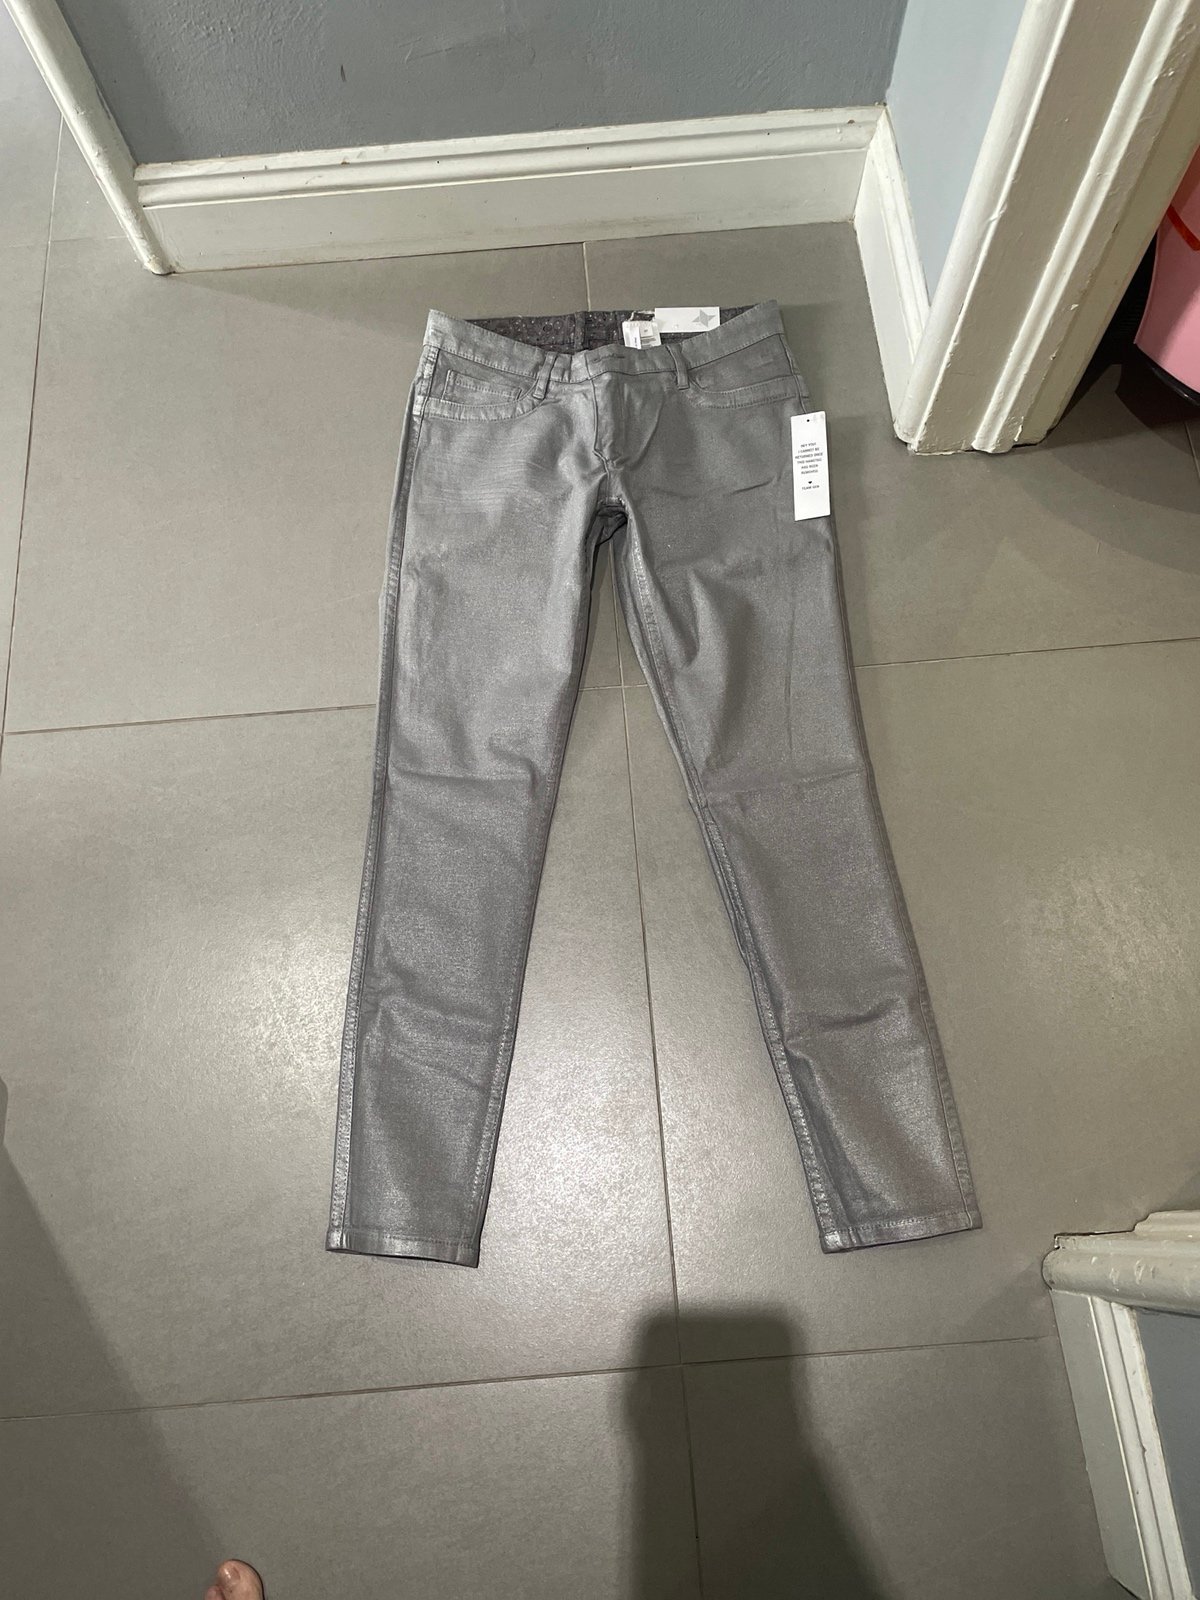 cheapest place to buy  Bcbgeneration Jasper Reversible skinny jeans size 27 ndbOzbG14 Outlet Store